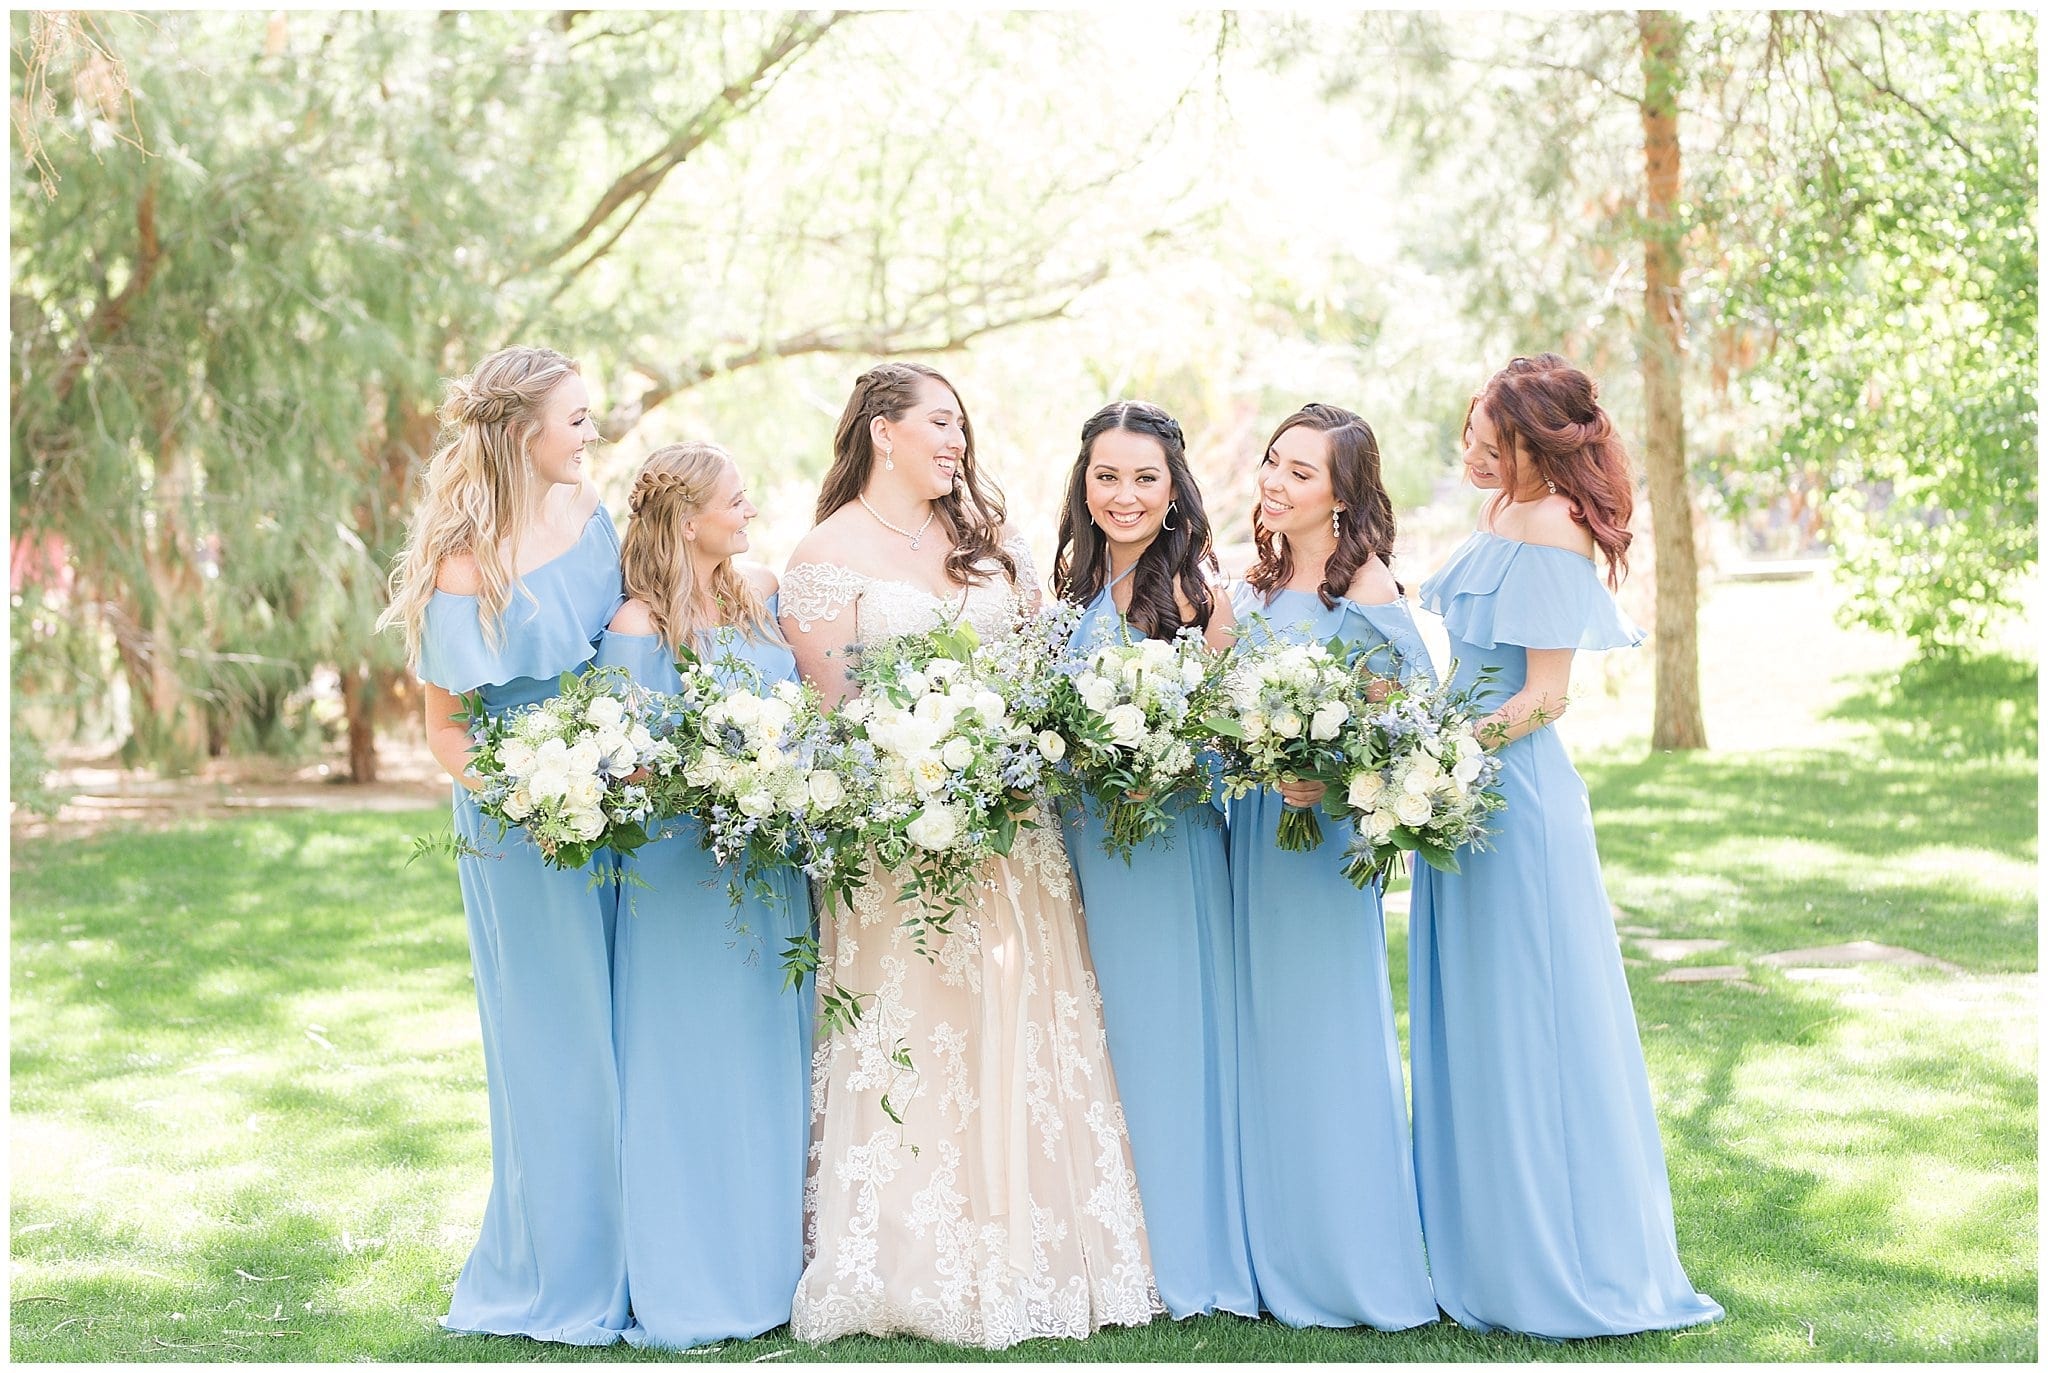 Windmill Winery Twisted Tree Ceremony Location | Bridesmaid Pictures